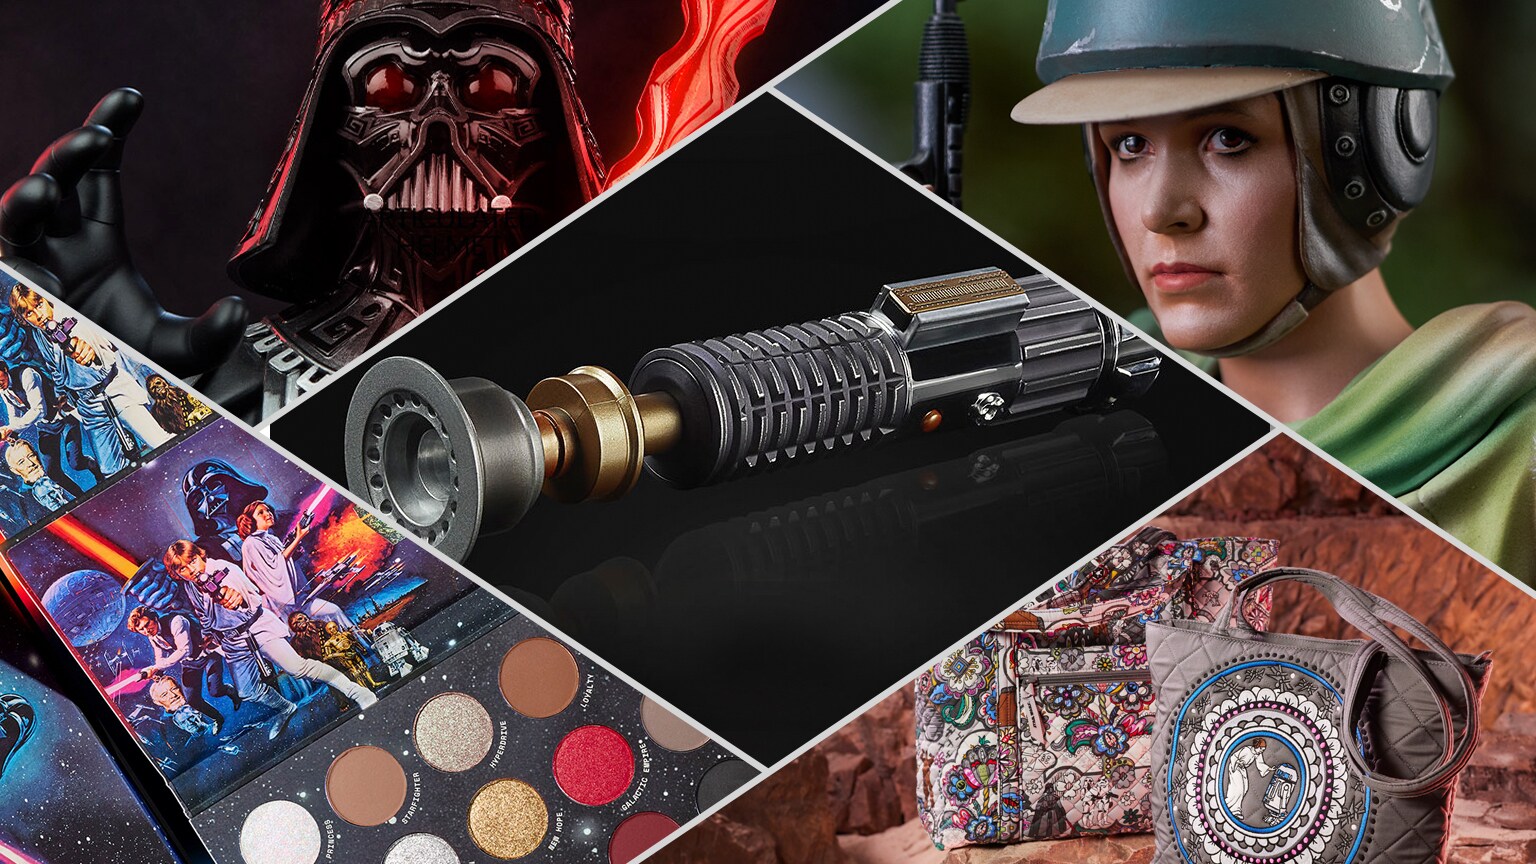 This New Star Wars Day Merchandise Is Actually Quite Civilized